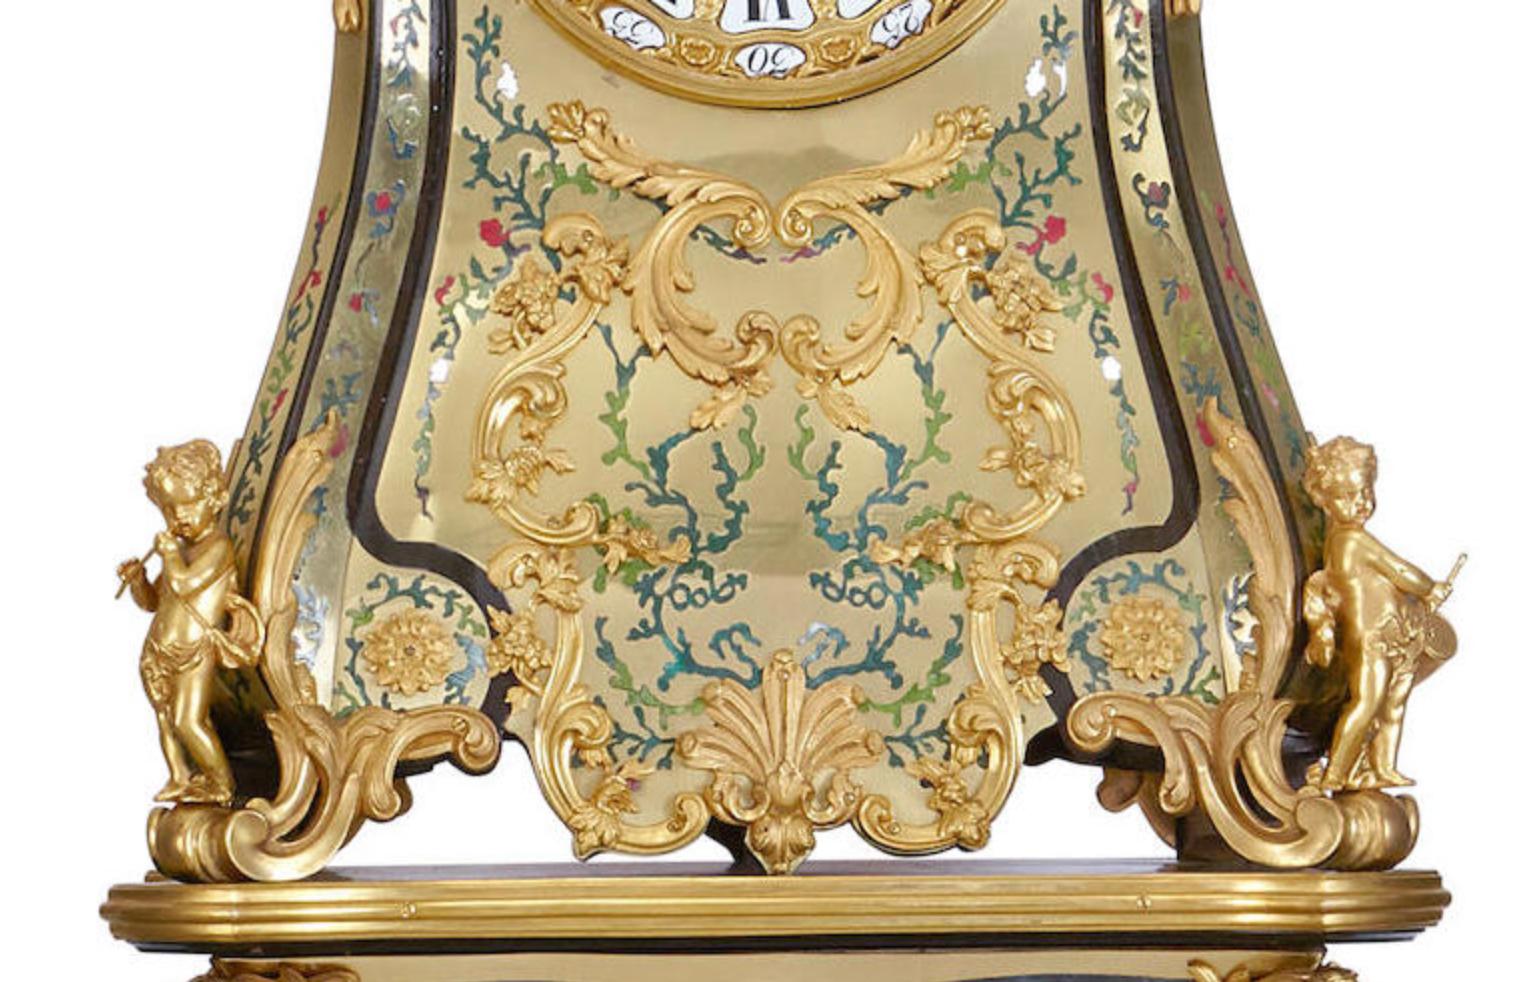 Rare Important French Louis XIV Style Gilt-Bronze Mounted Boulle Marquetry Clock For Sale 2